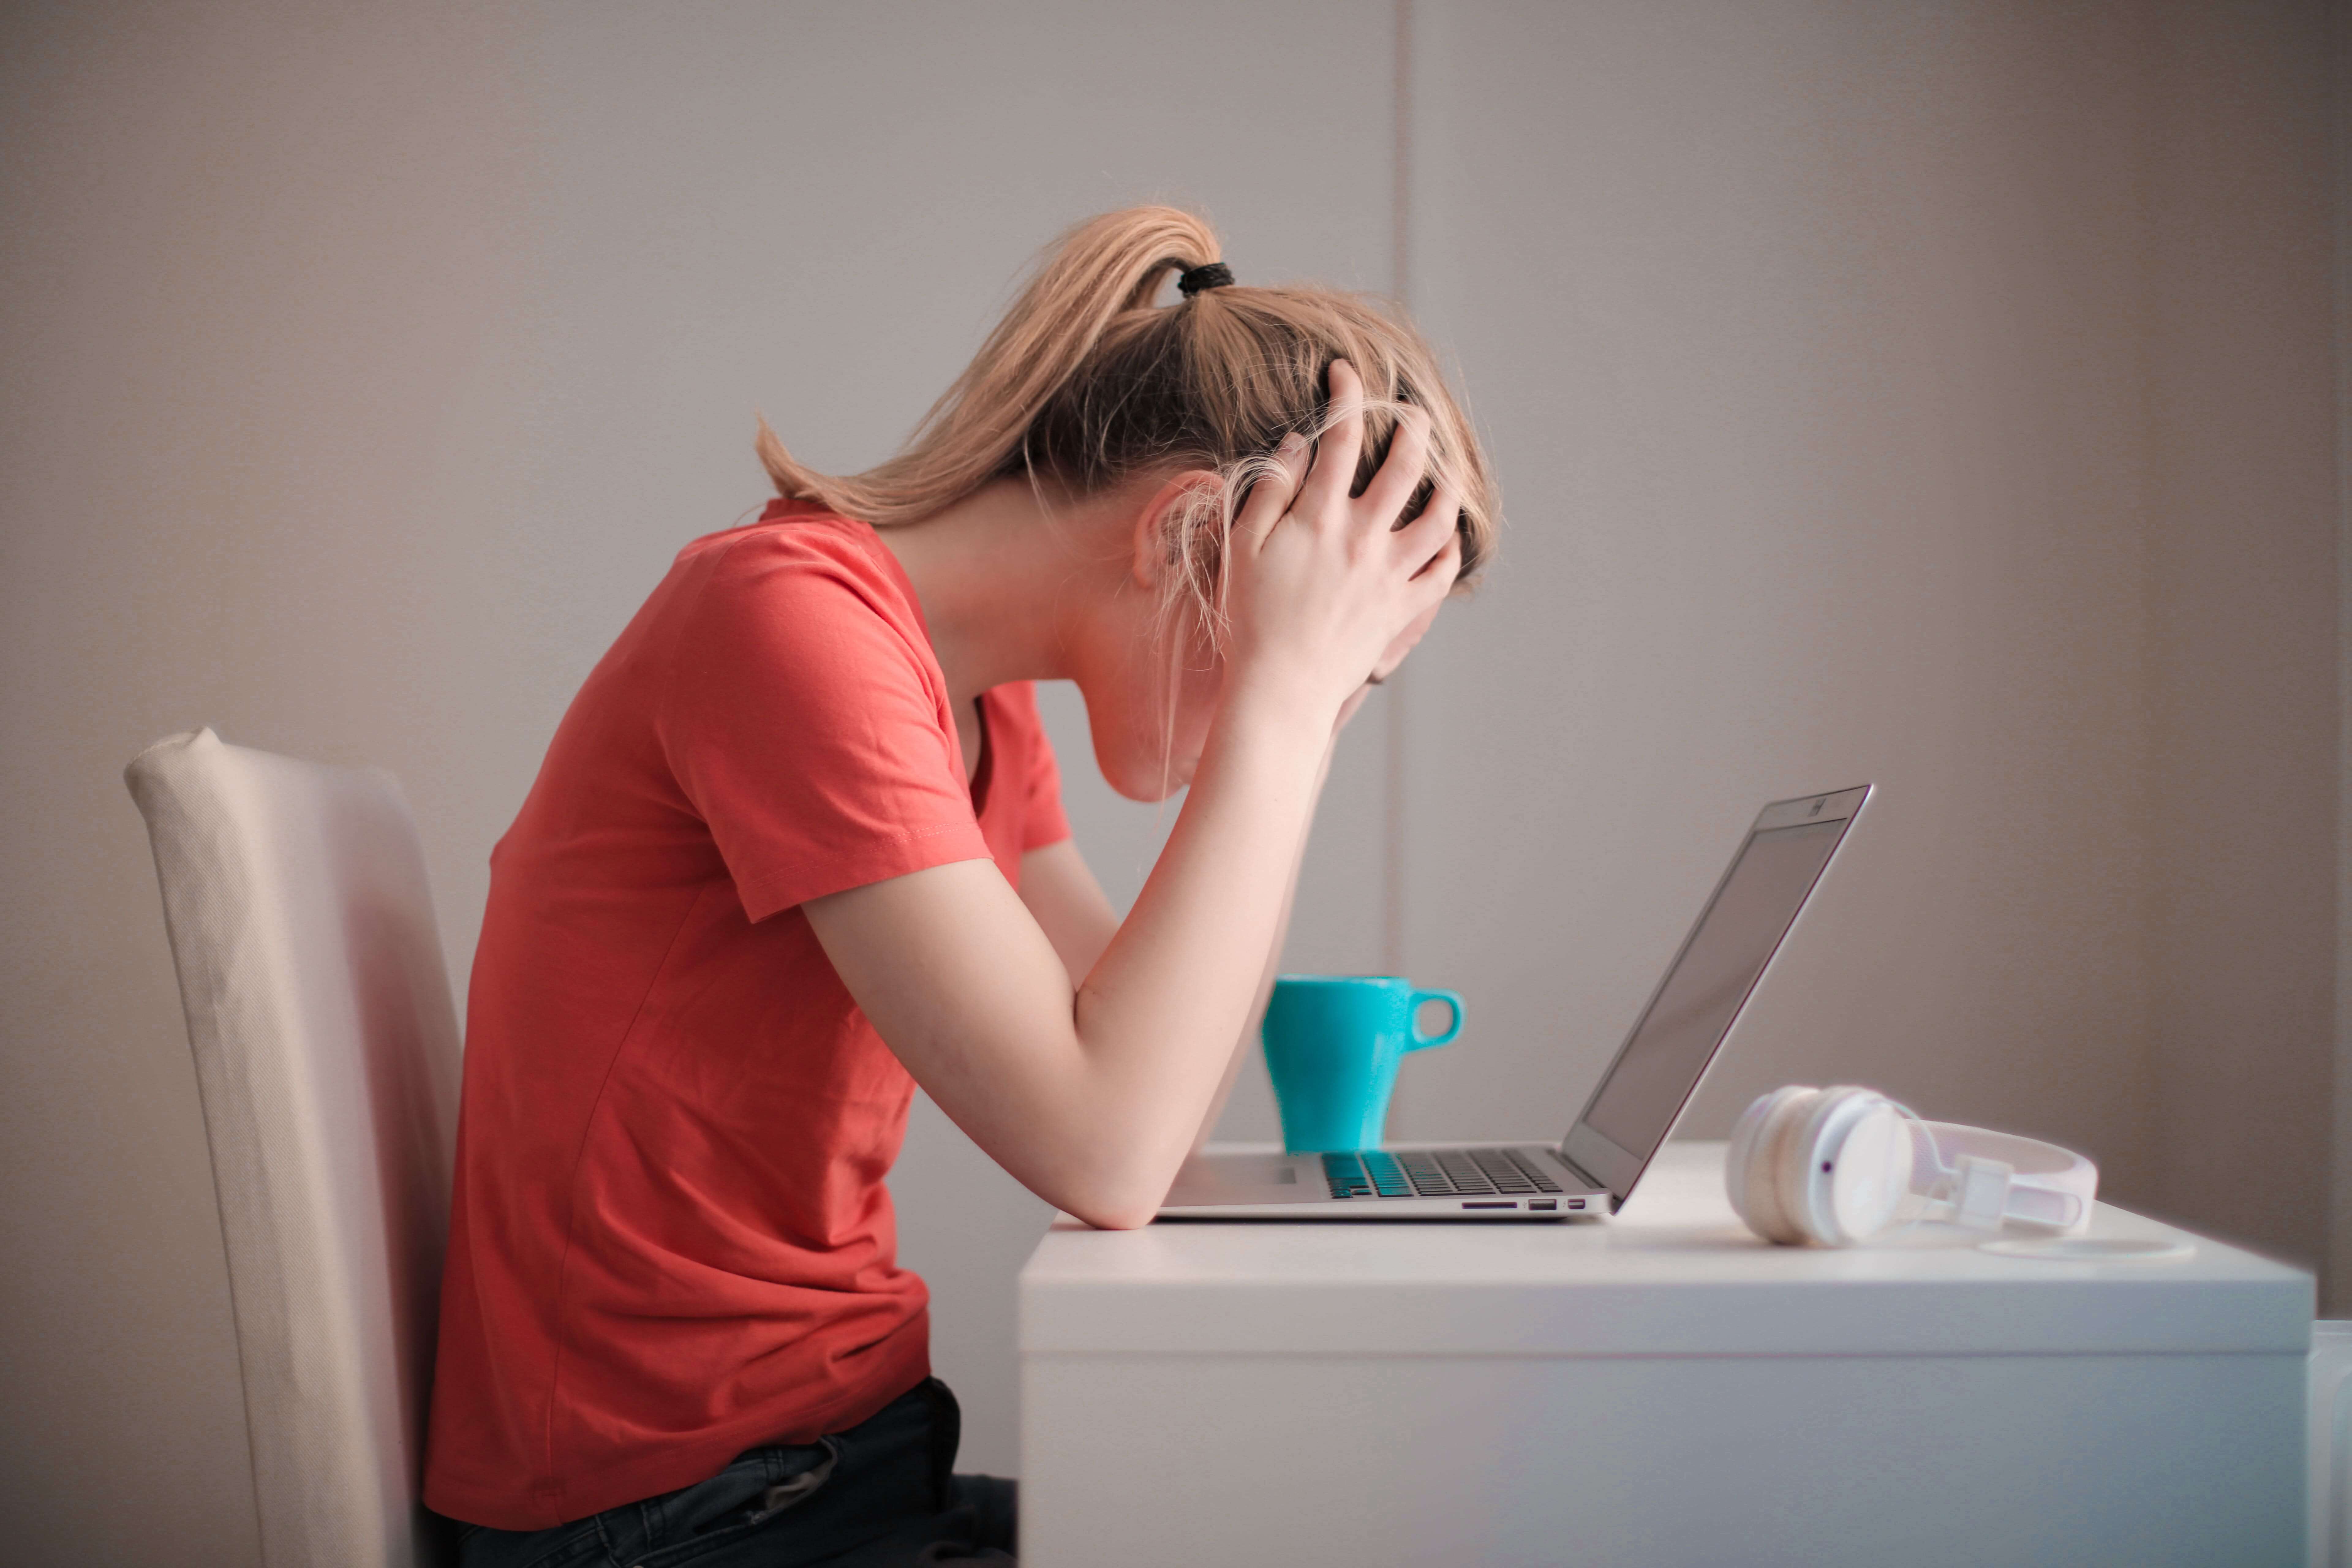 A woman stressed in front of a laptop